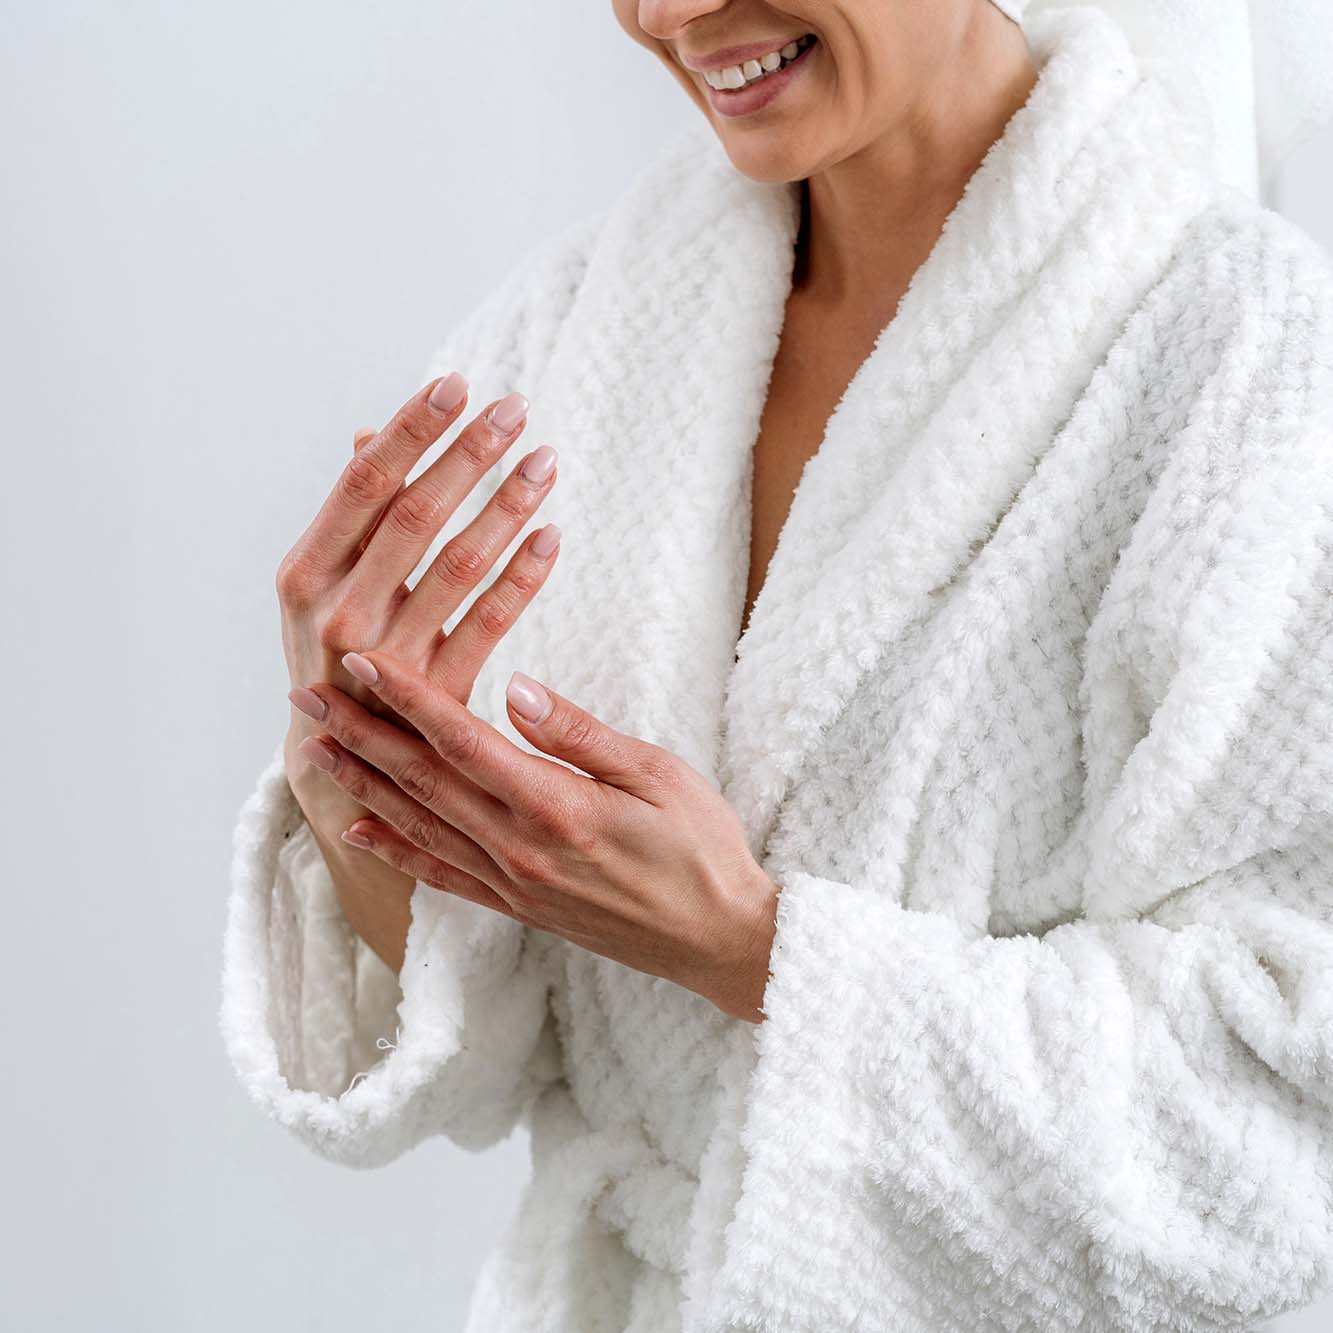 lady putting lotion on hands in a white bath robe